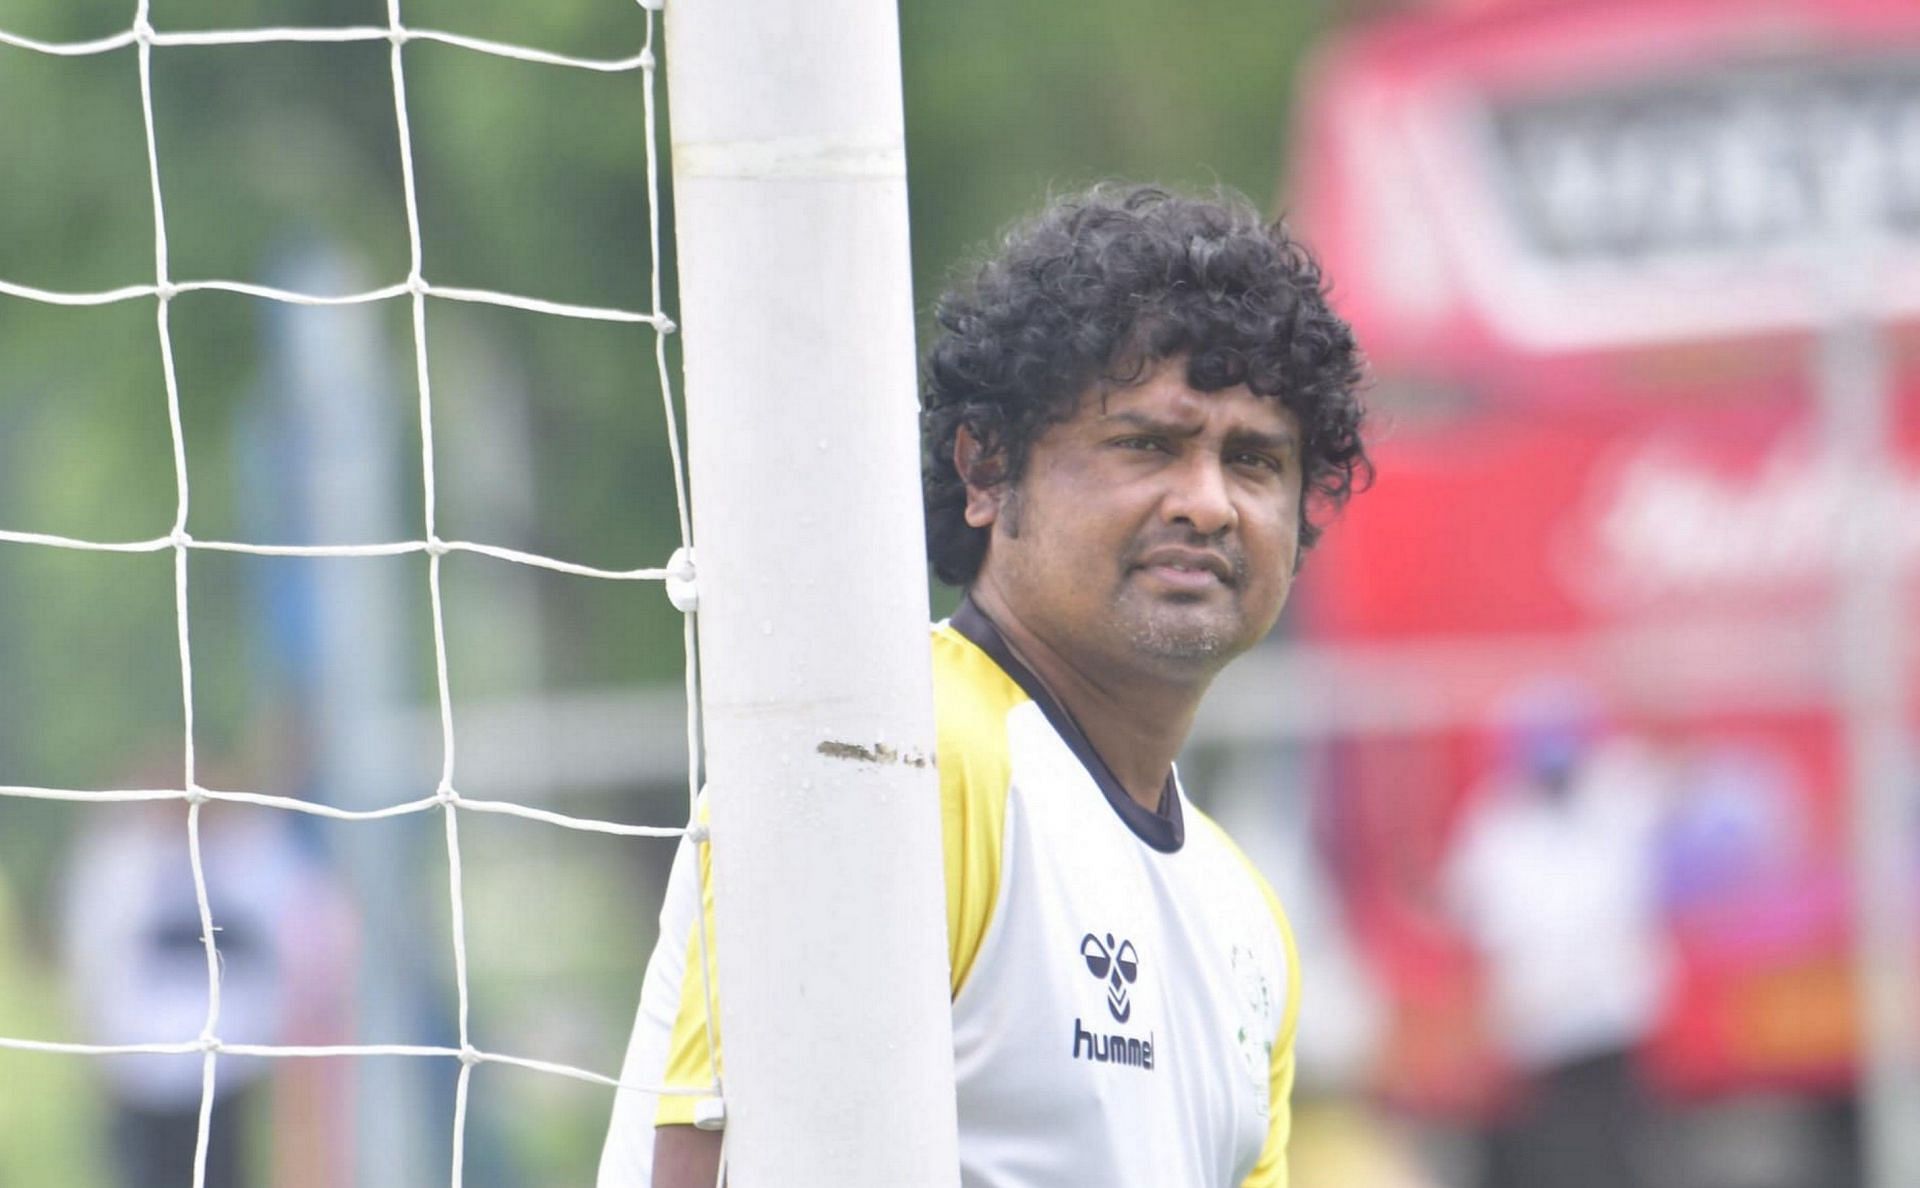 Dipendu Biswas is confident that Mohammedan Sporting Club will be able to retain eighty percent of their current squad for the next season. Image: Facebook